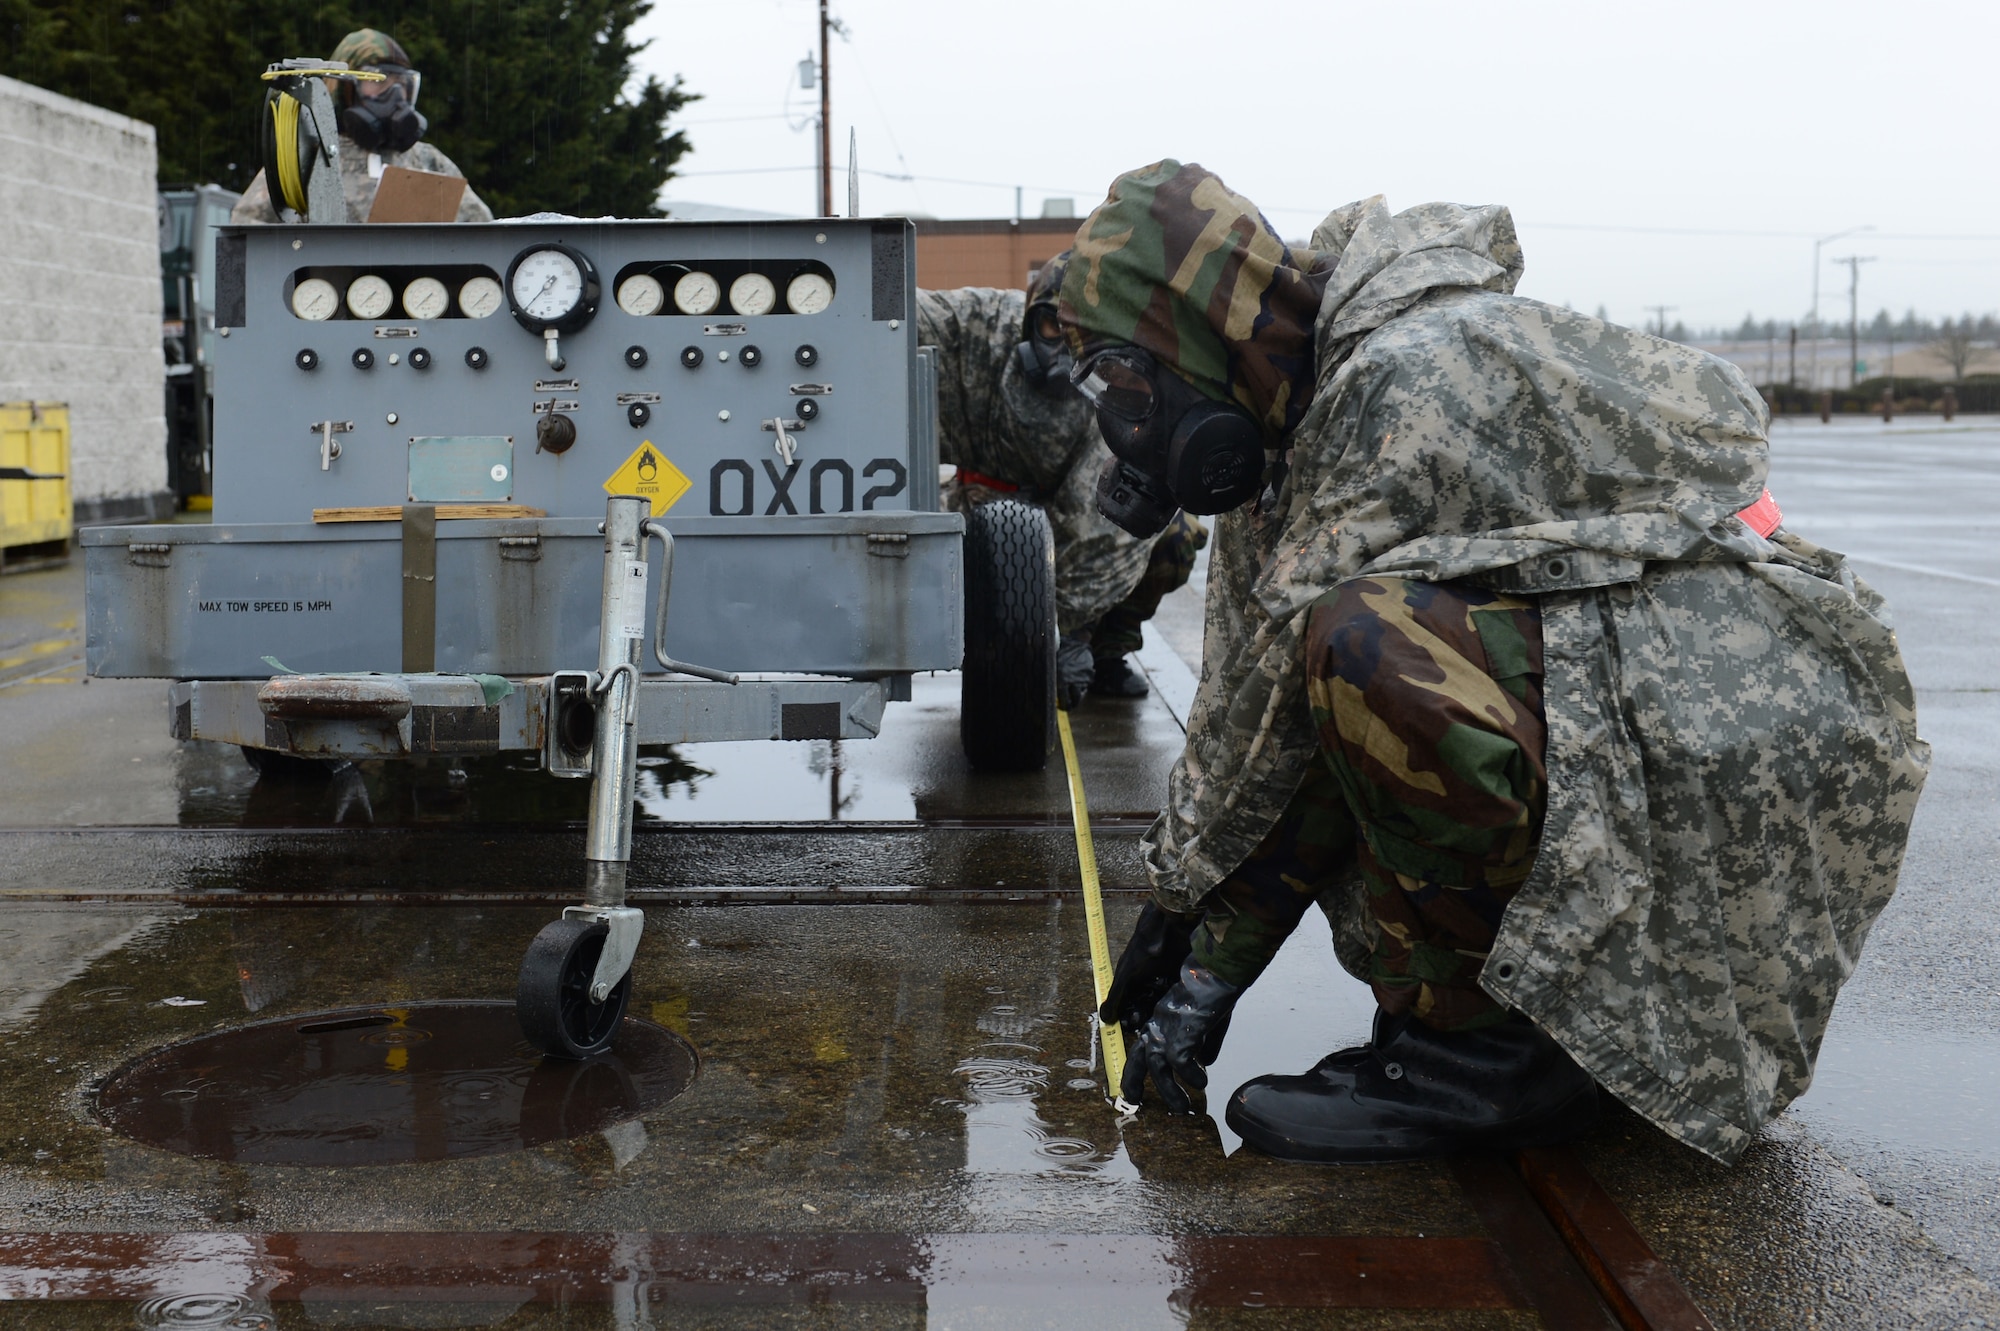 Airman 1st Class Conner Adams and Airman 1st Class Andrew Amezquita, 62nd Aerial Port Squadron air transportation, measure cargo for upload during Exercise Winterhook, Jan 23, 2018, at the McChord Field flightline, Joint Base Lewis-McChord, Wash. Cargo is checked for correct documentation, weights, and dimensions before being loaded onto an aircraft. (U.S. Air Force photo by Airman 1st Class Sara Hoerichs)